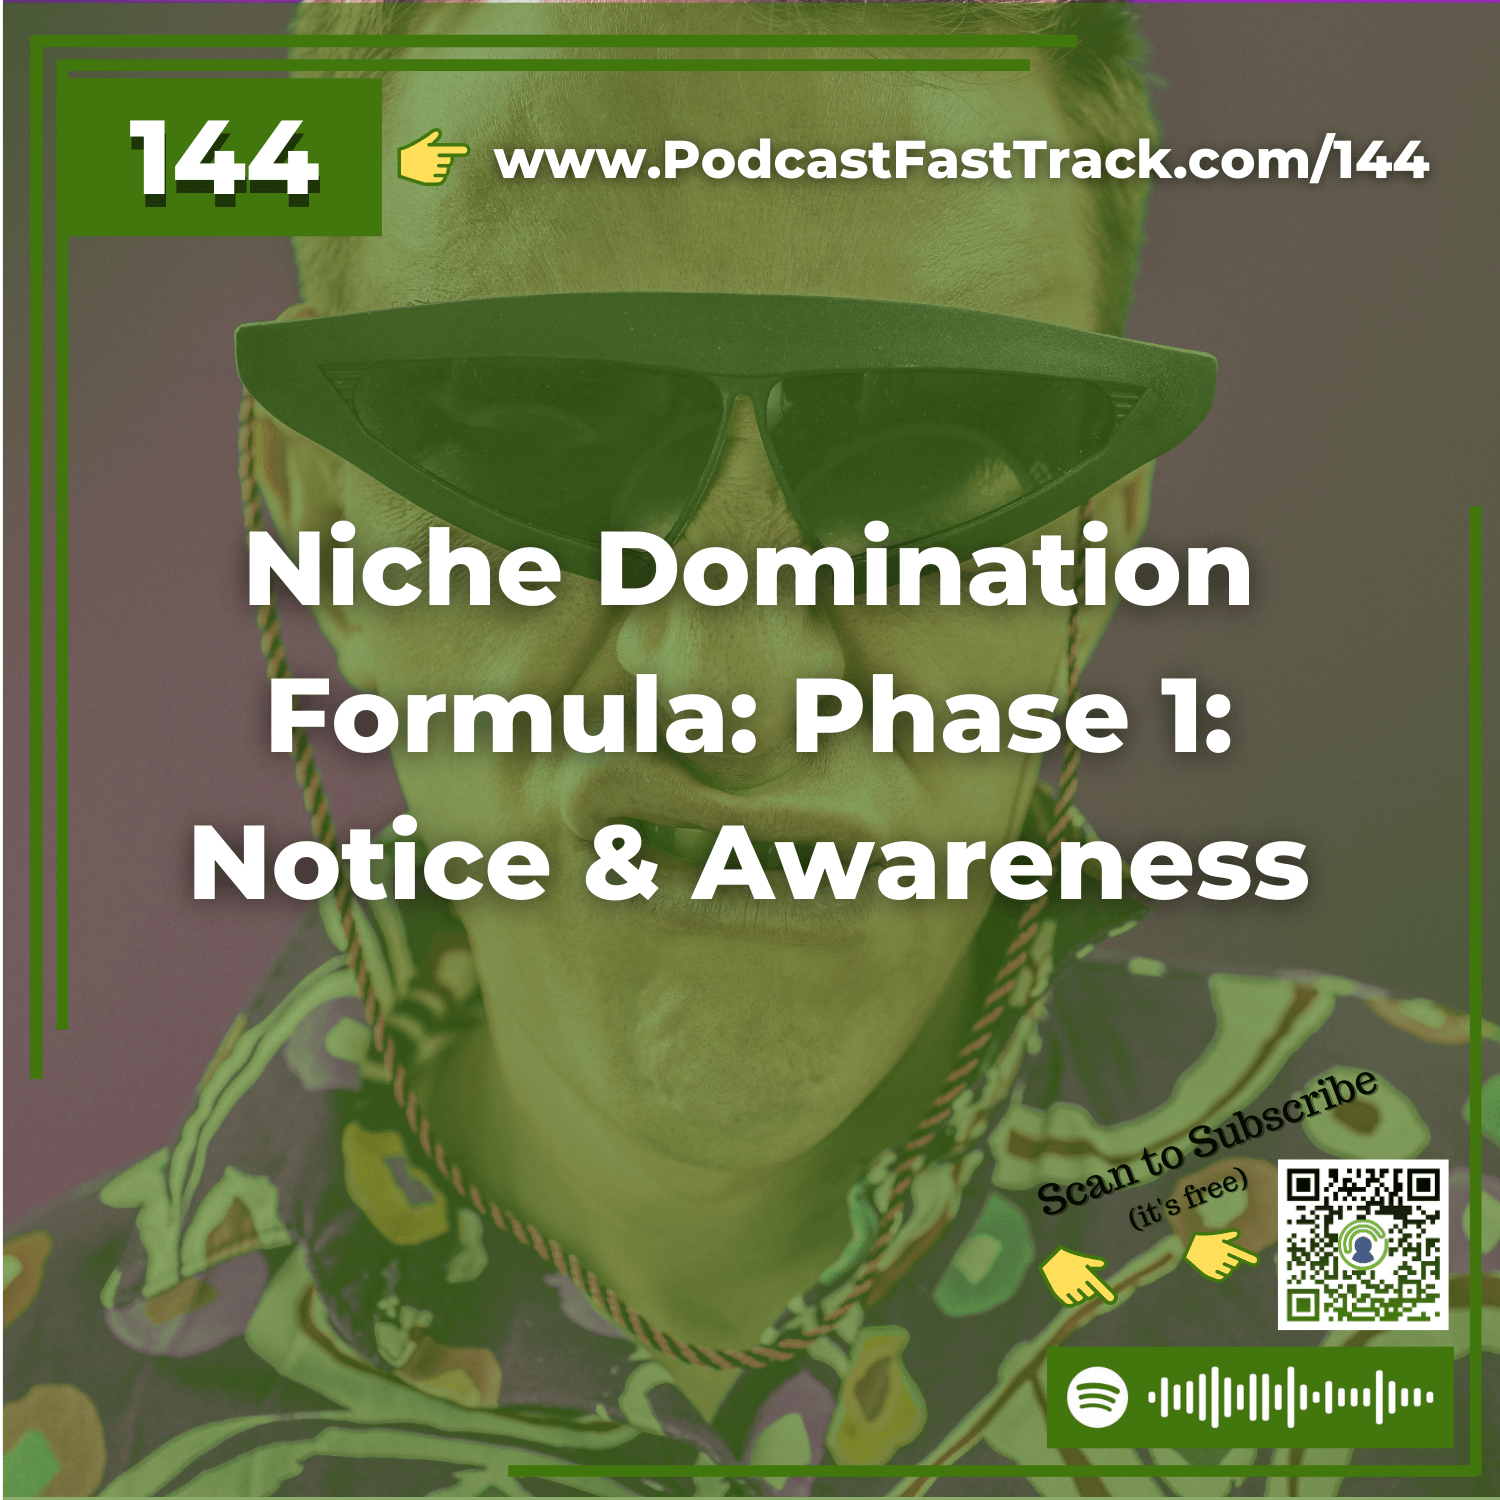 144: Notice & Awareness - Phase 1 of The Podcast Niche Domination Formula